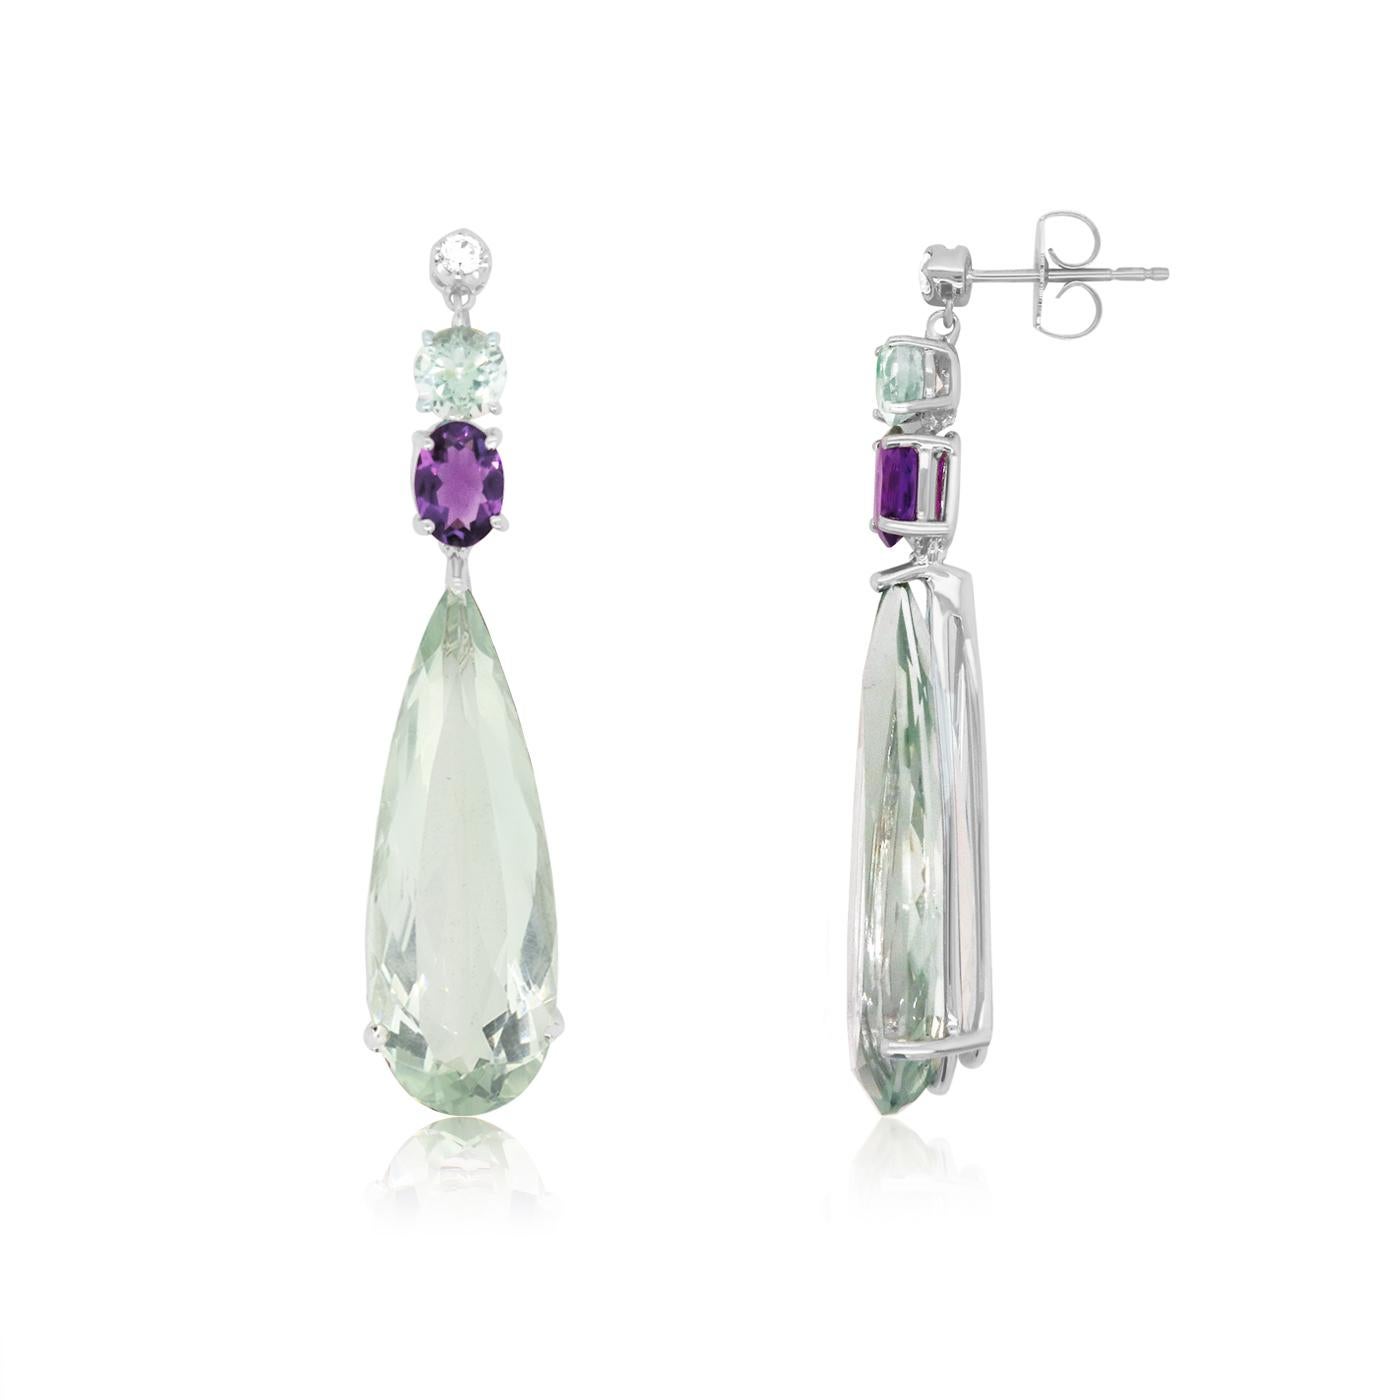 Material: 14k White Gold 
Stones: 2 Pear Shape Green Amethysts at 23.80 Carats Total
Accent Stones: 2 Round Green Amethysts at 1.07 Carats Total
Accent Stones: 2 Round Purple Amethysts at 1.40 Carats Total
Accent Stones: 2 Round White Diamonds at